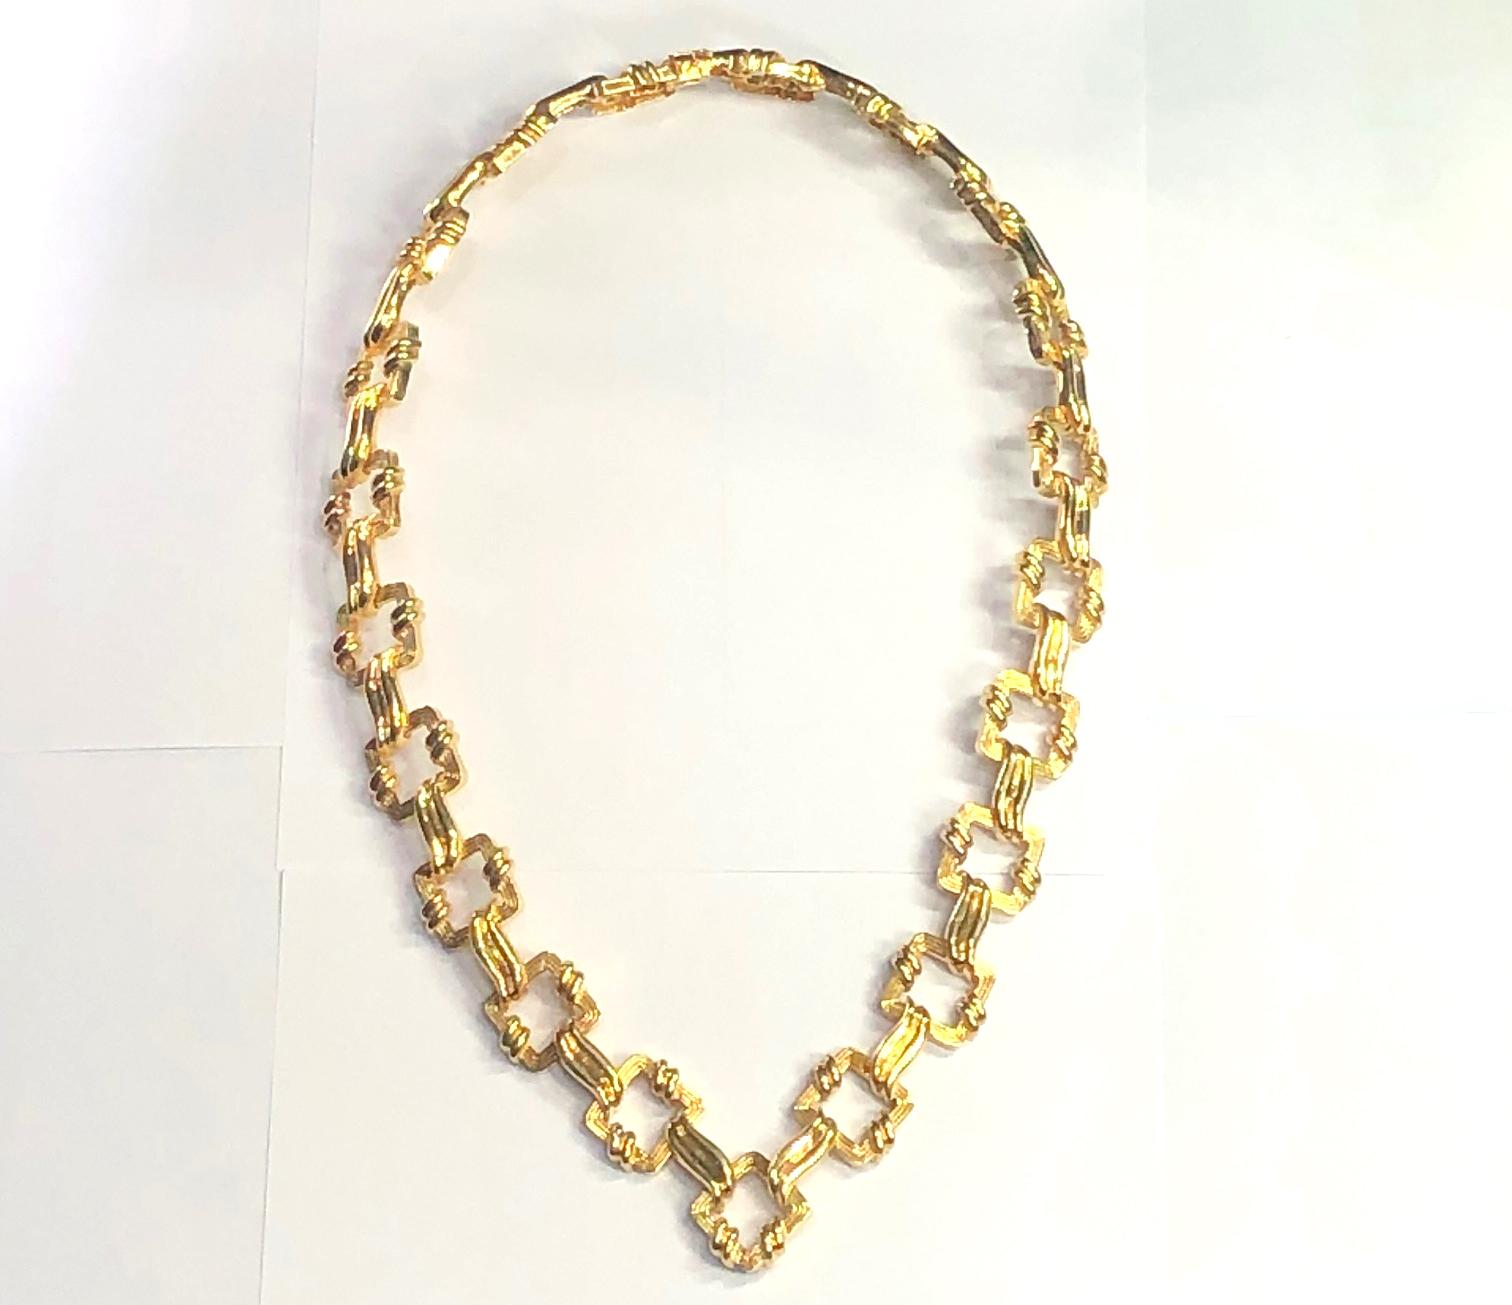 Fashioned from 10 Troy Ounces of 18k yellow gold, this very large scale Tiffany & Co. necklace is a major gold masterwork created by that venerable firm in the late twentieth century.  The necklace is 28 inches in length without the pendant which